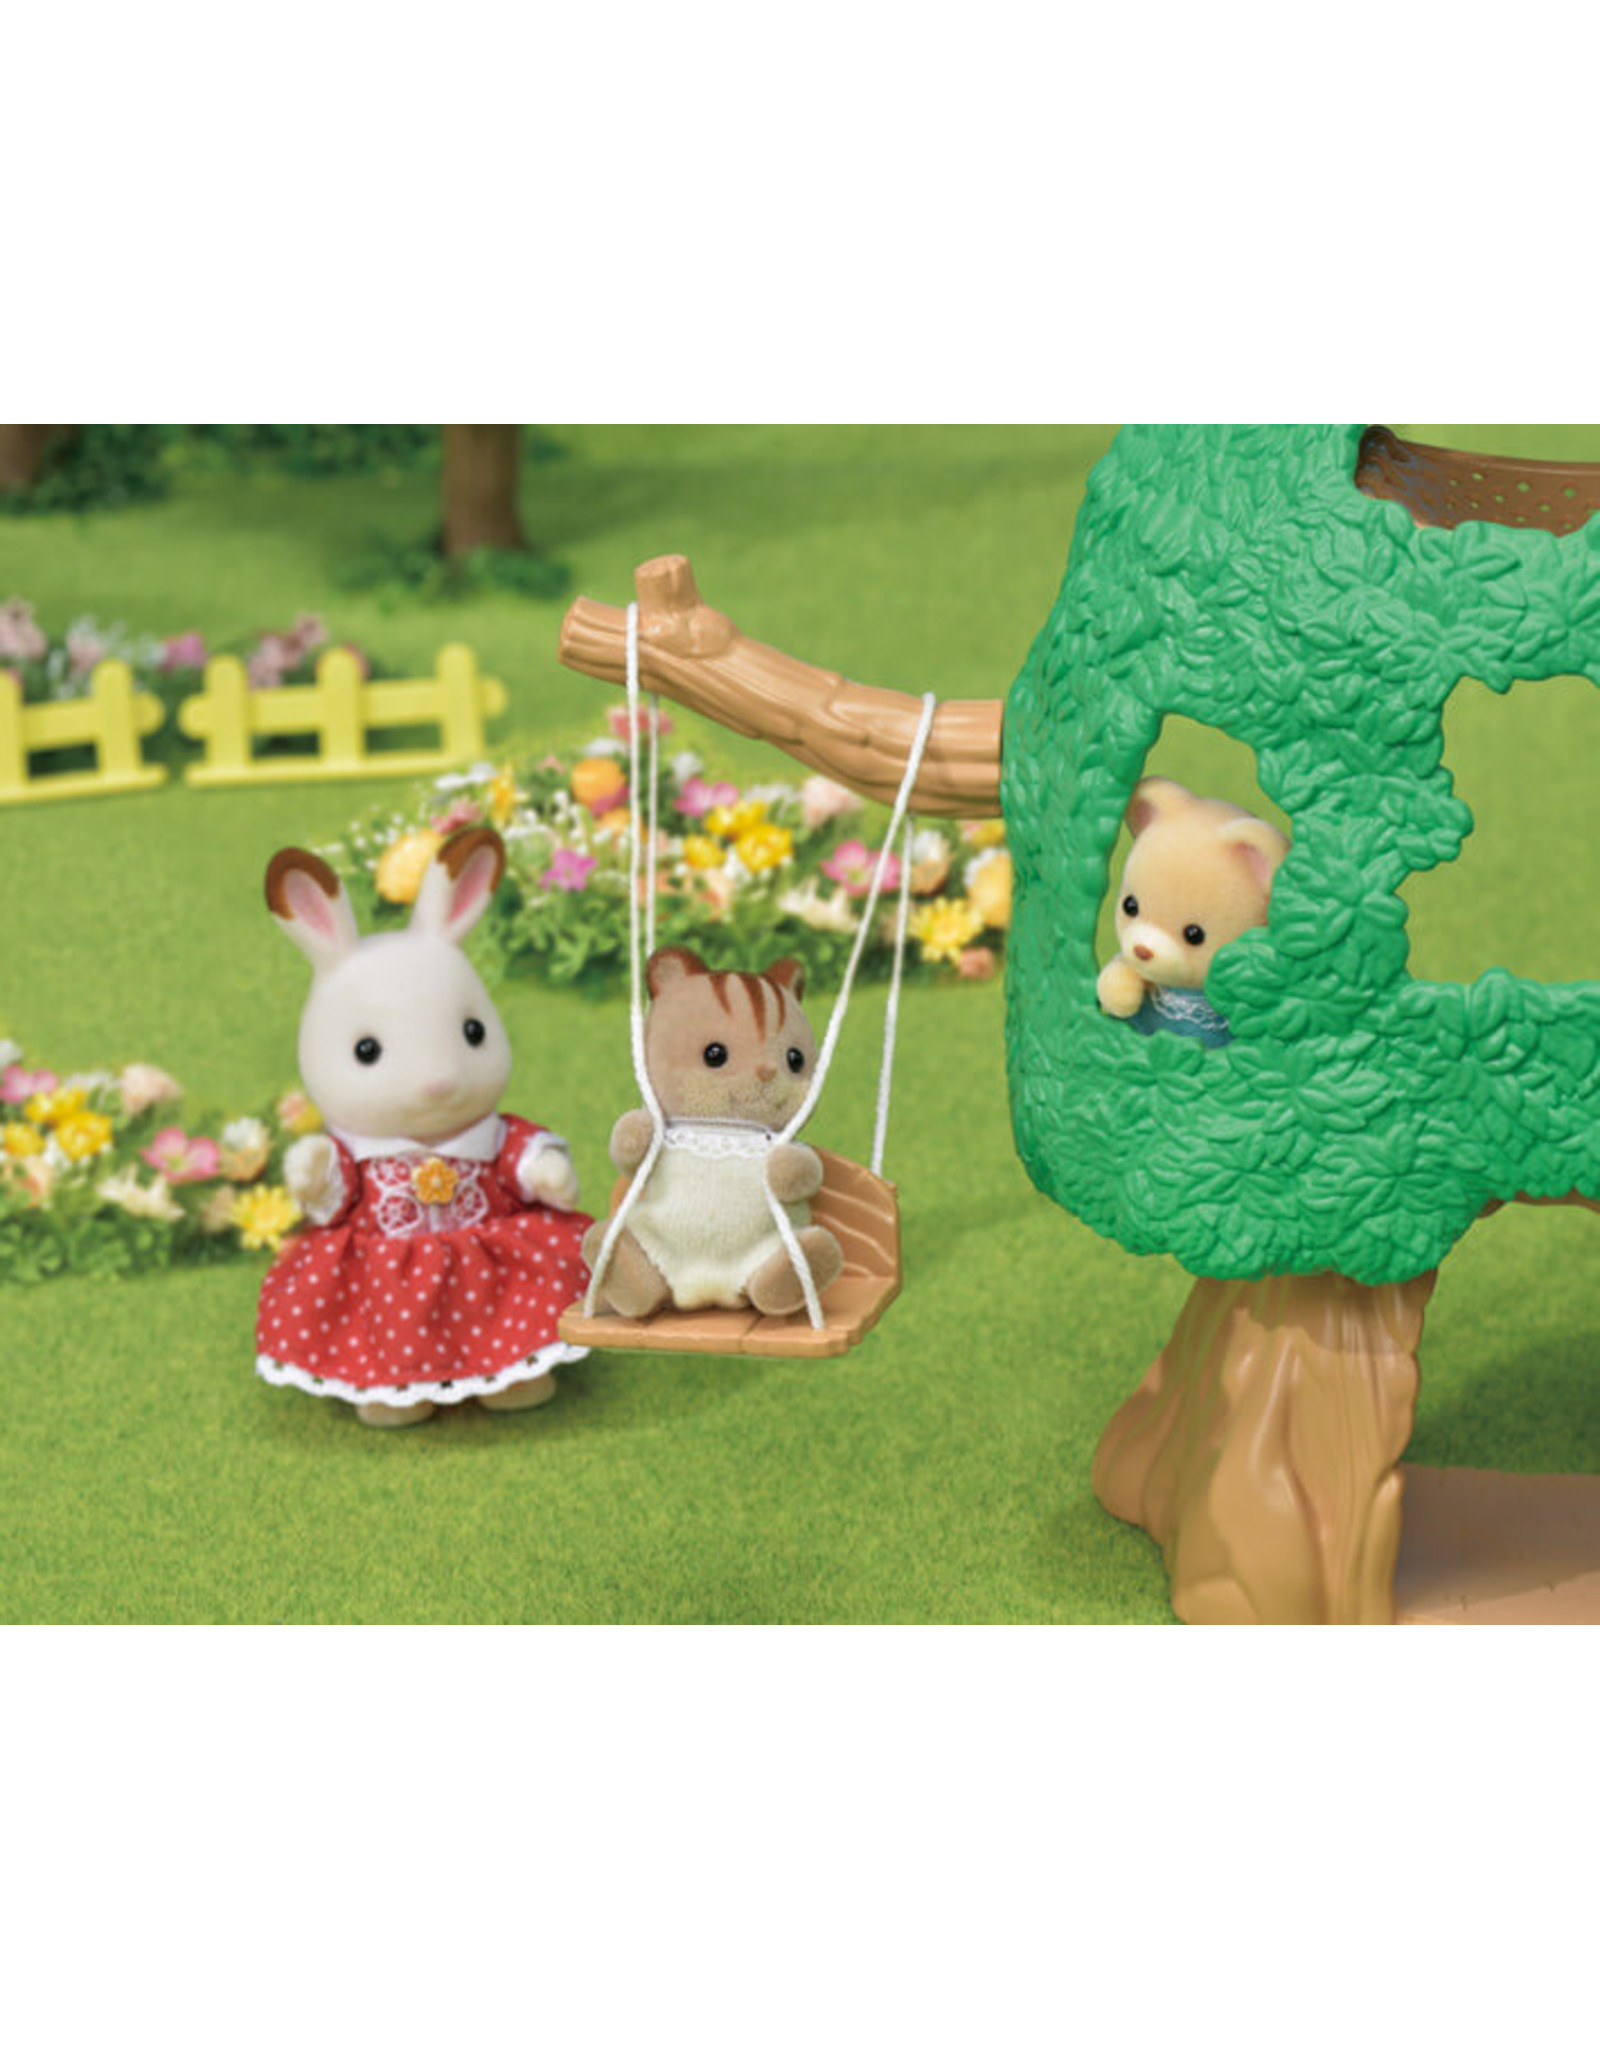 Calico Critters Calico Critters Baby Tree House